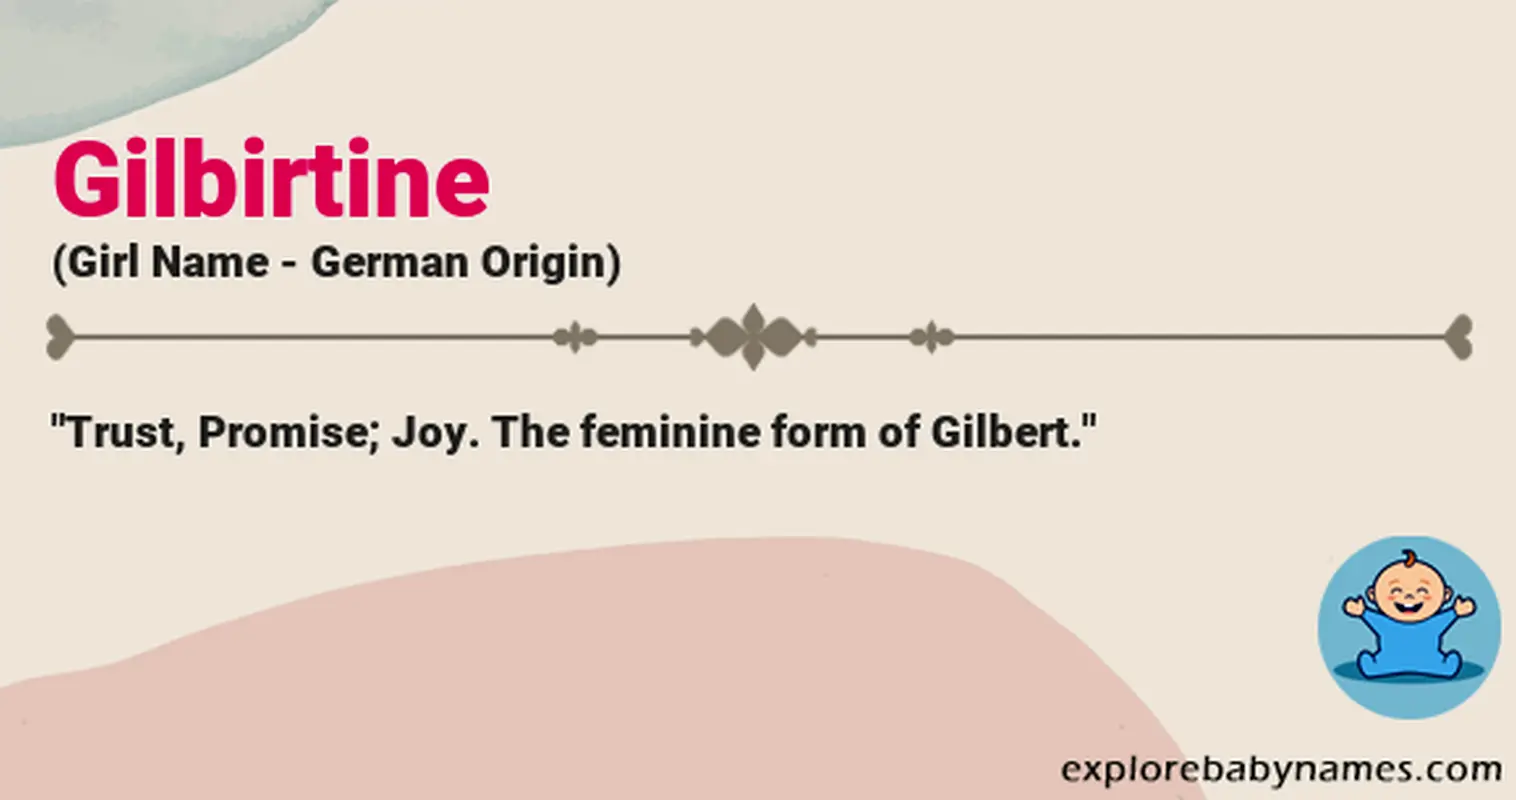 Meaning of Gilbirtine